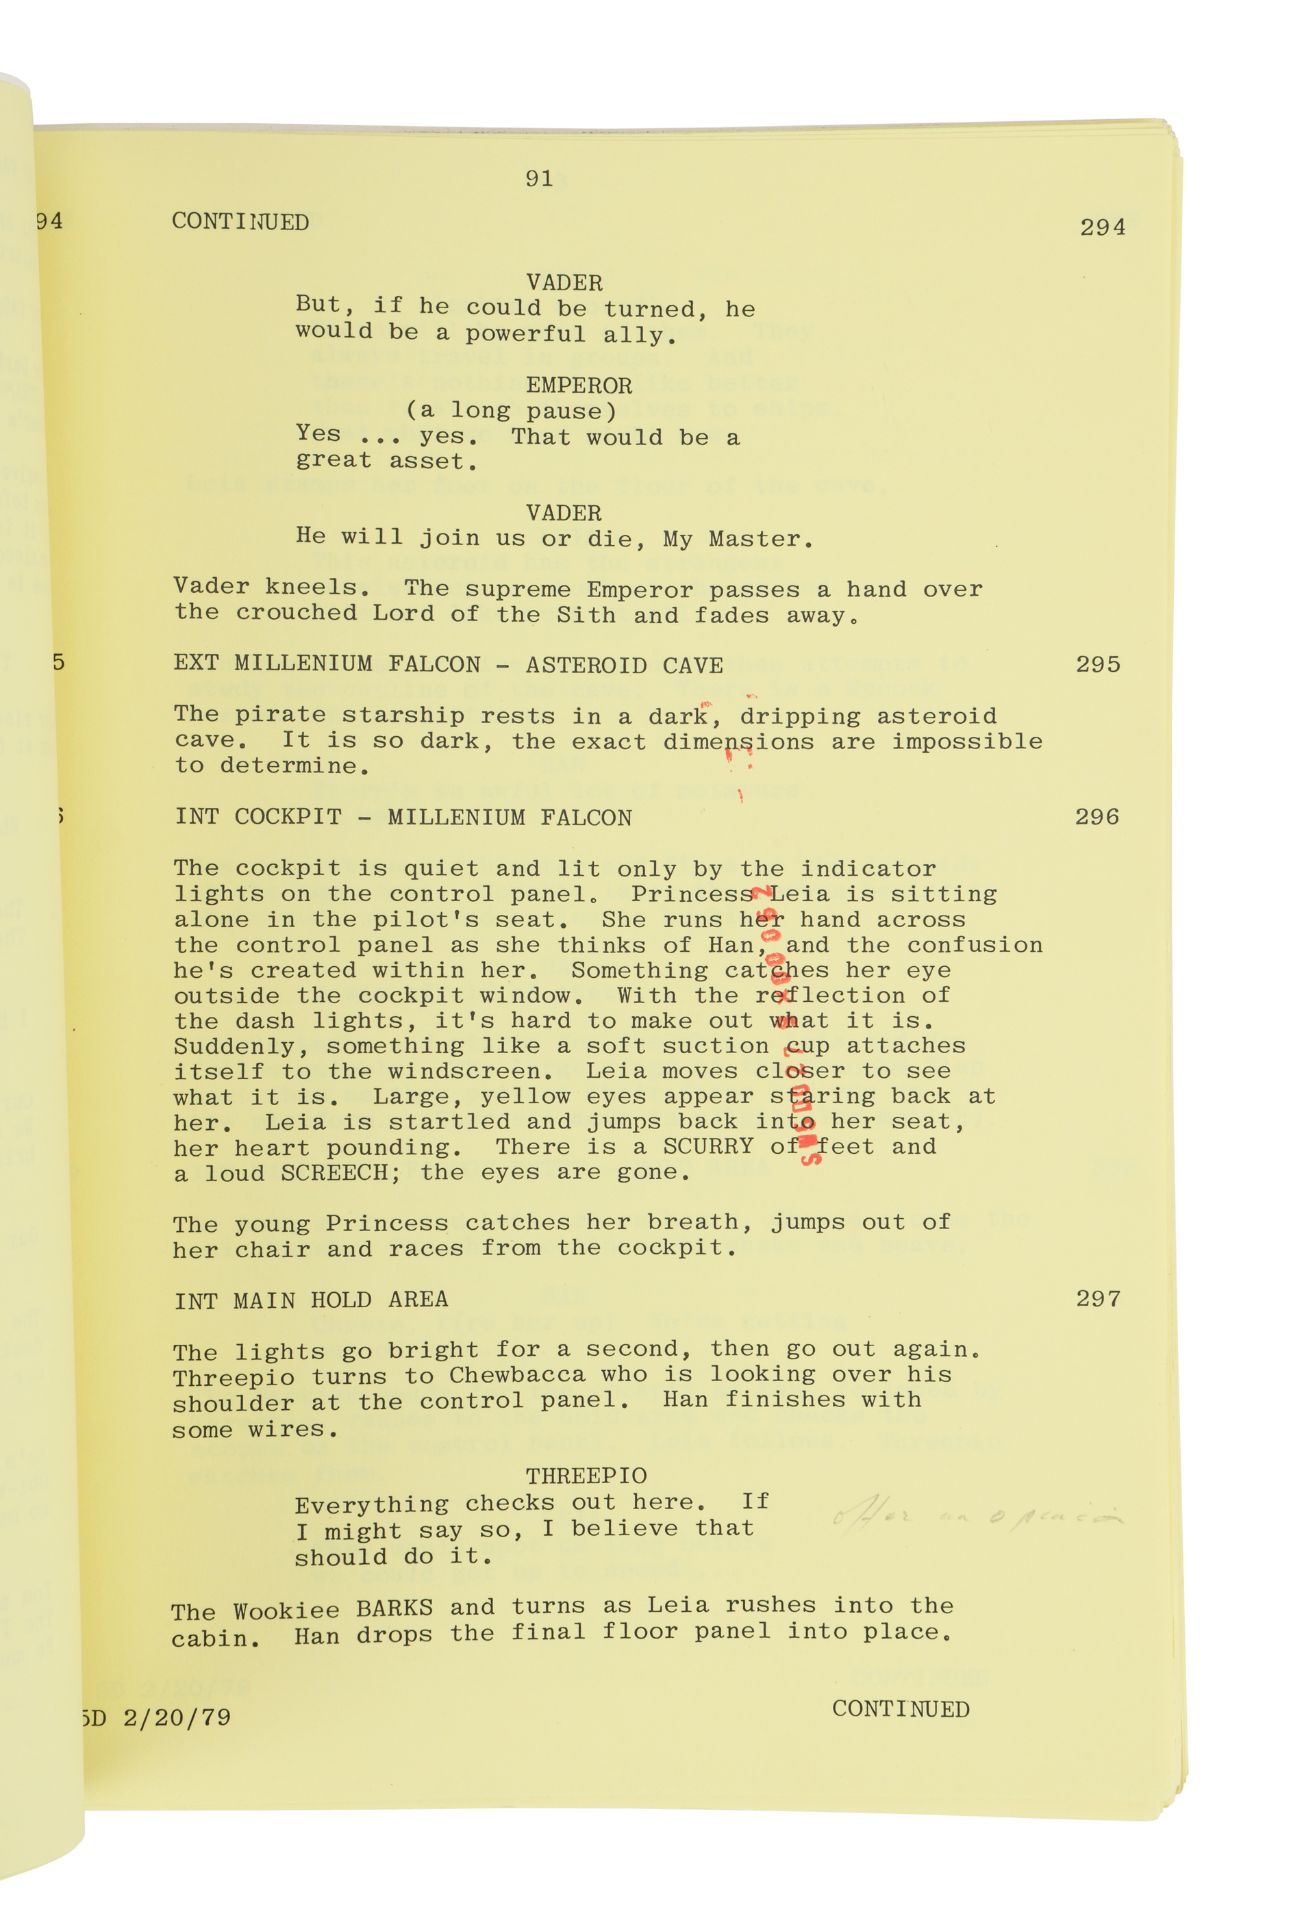 STAR WARS: THE EMPIRE STRIKES BACK (1980) - Anthony Daniels Collection: Hand-annotated Partial Scrip - Image 9 of 12